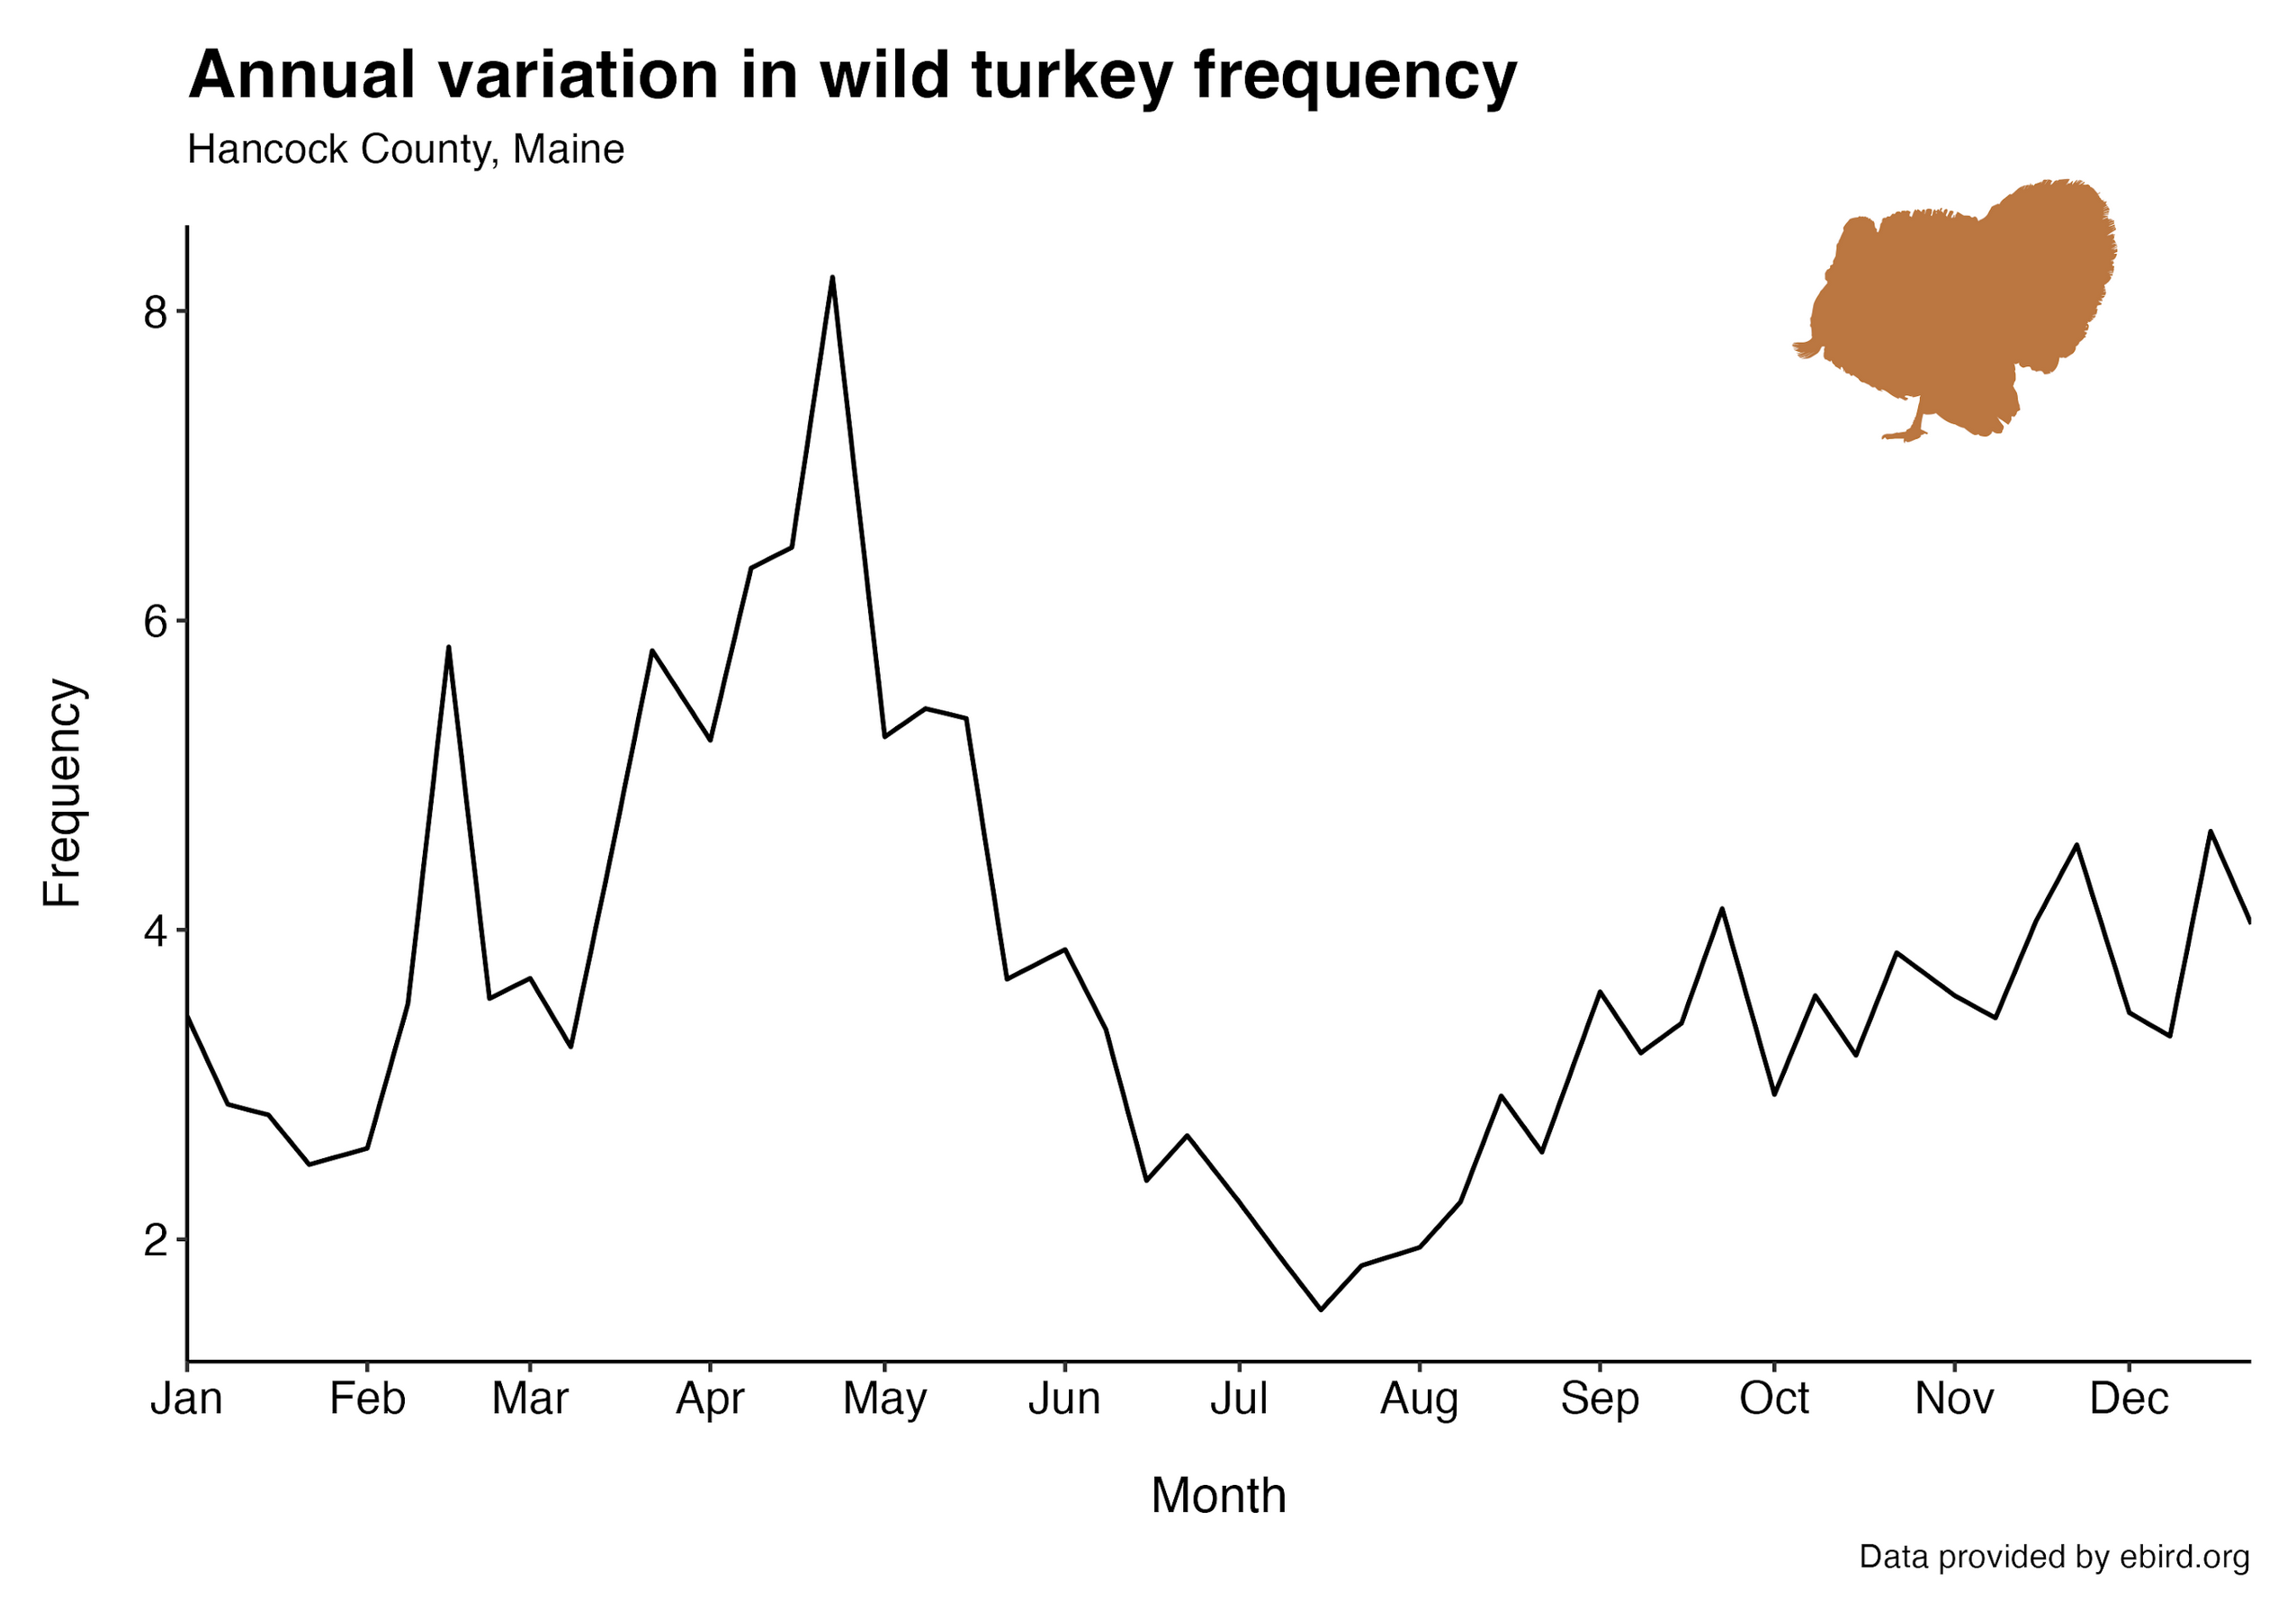 A line graph showing the annual fluctuations in frequency. The peak frequency occurs in late April and early May with troughs in July and January. The wild turkey is observed consistently throughout the fall.